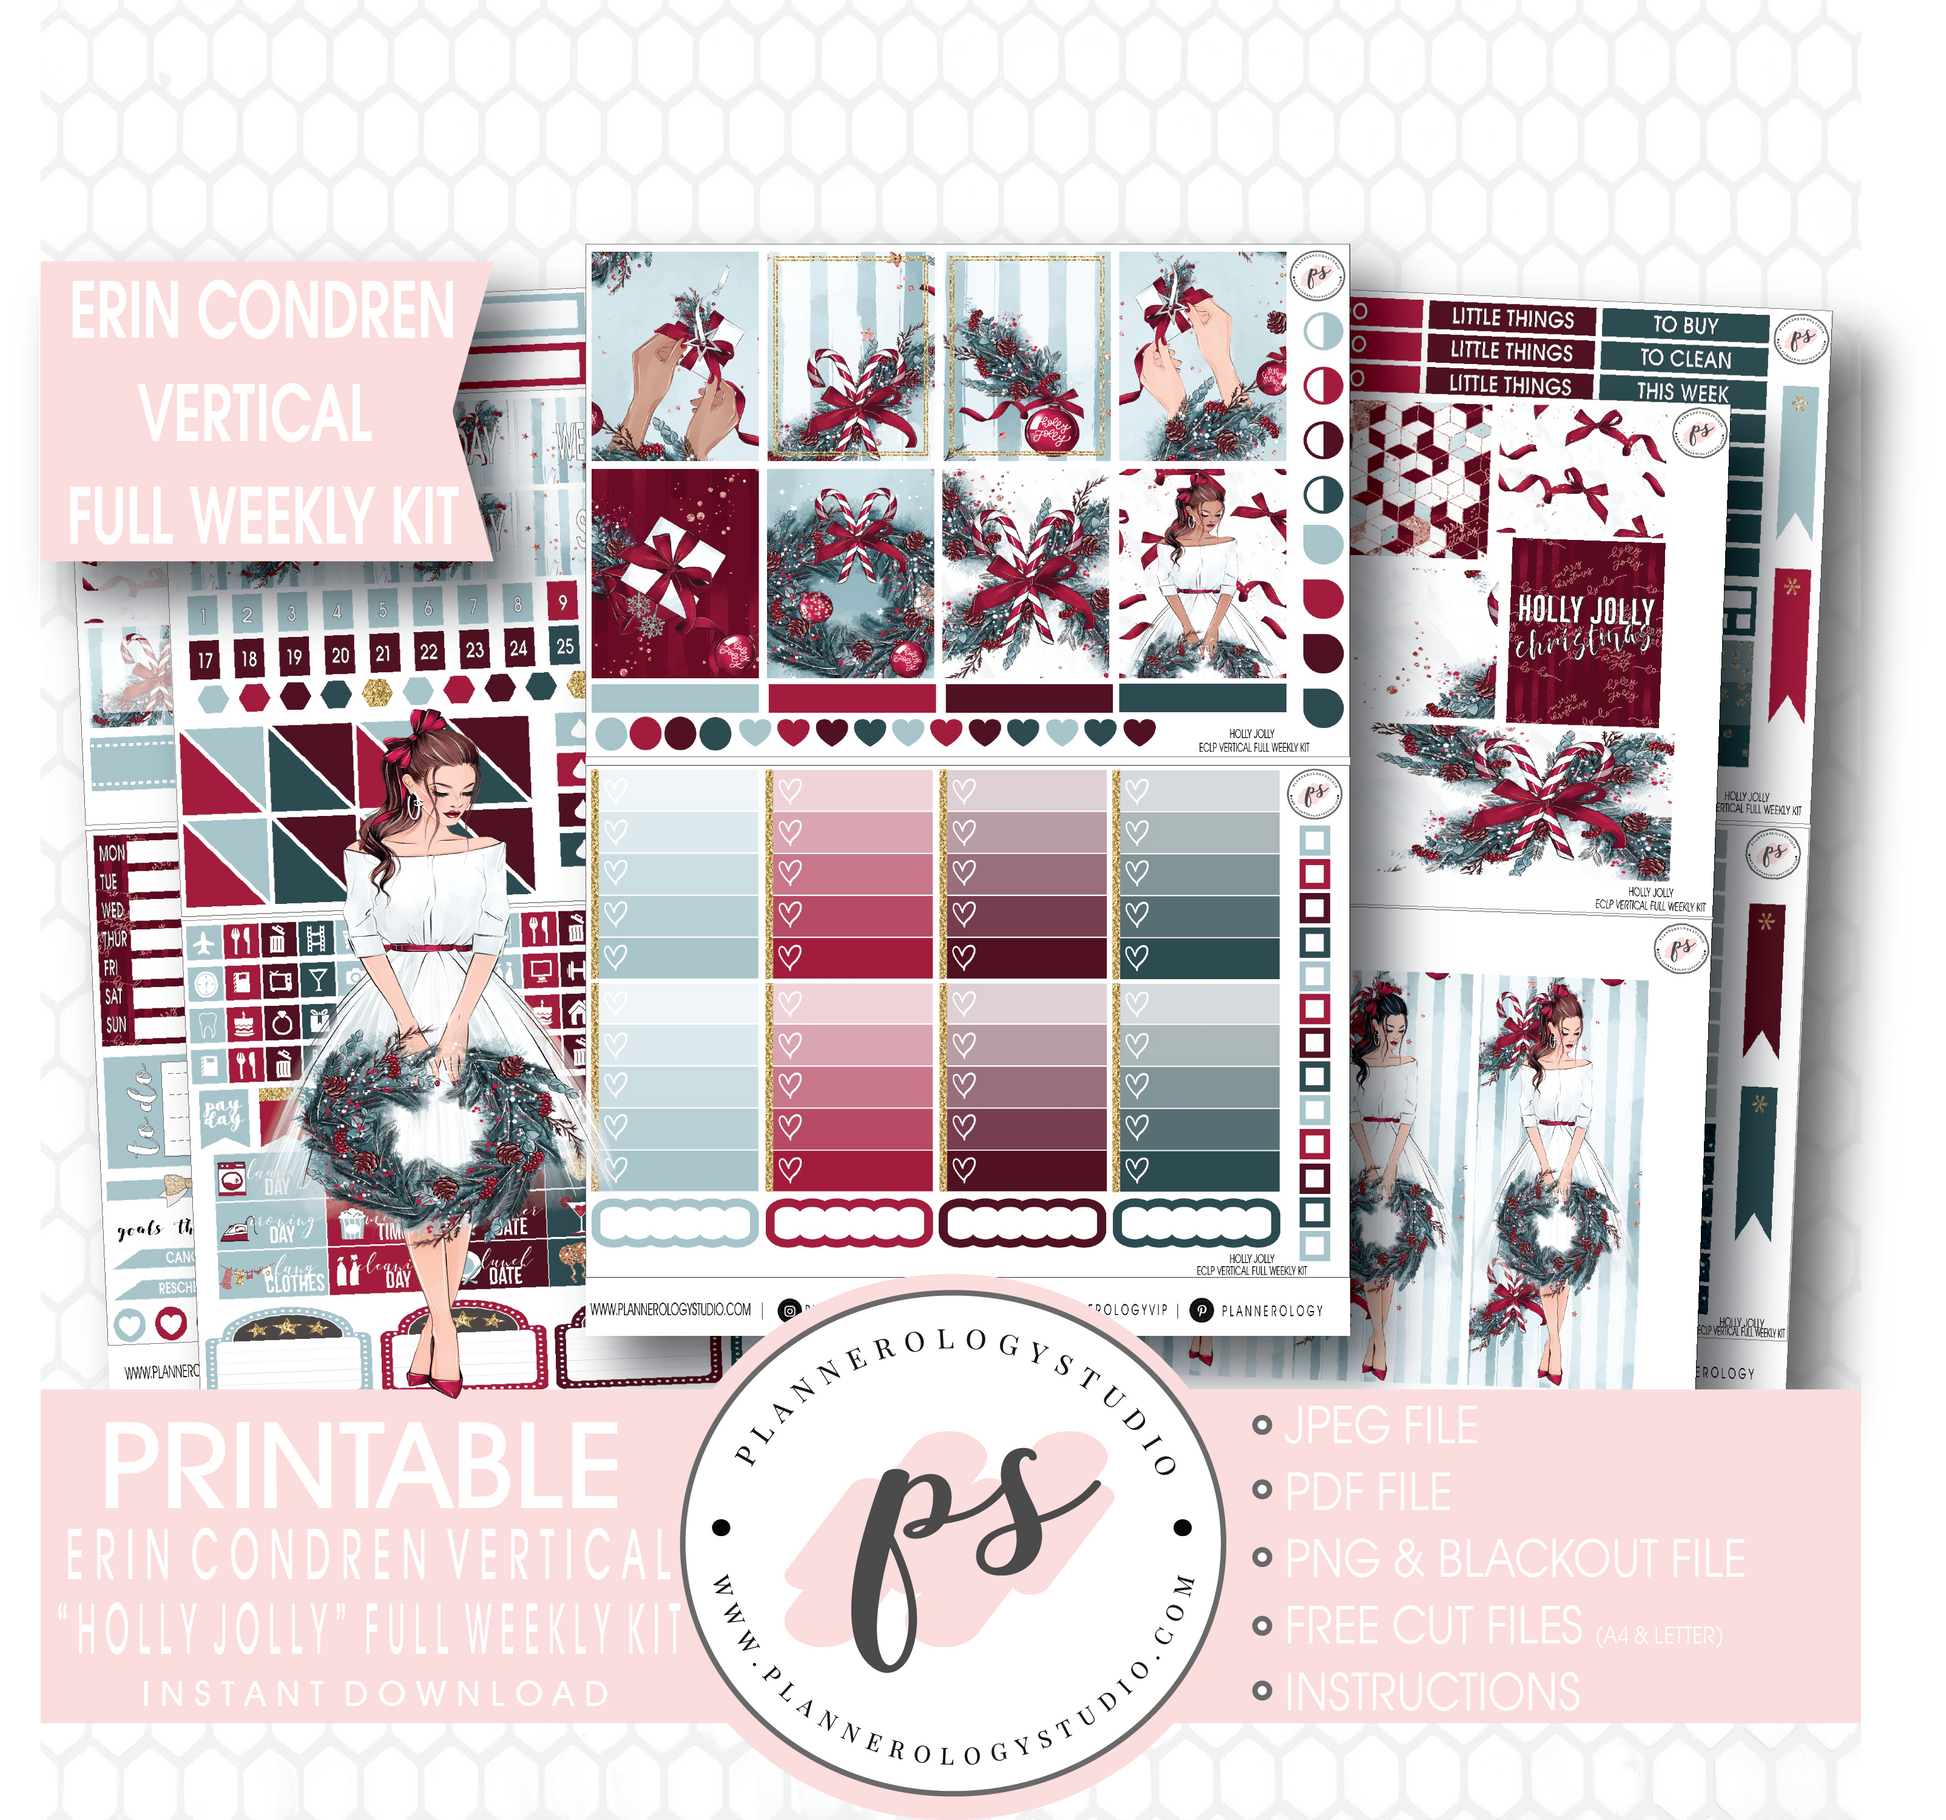 Holly Jolly Christmas Full Weekly Kit Printable Planner Stickers (for use with Erin Condren Vertical) - Plannerologystudio